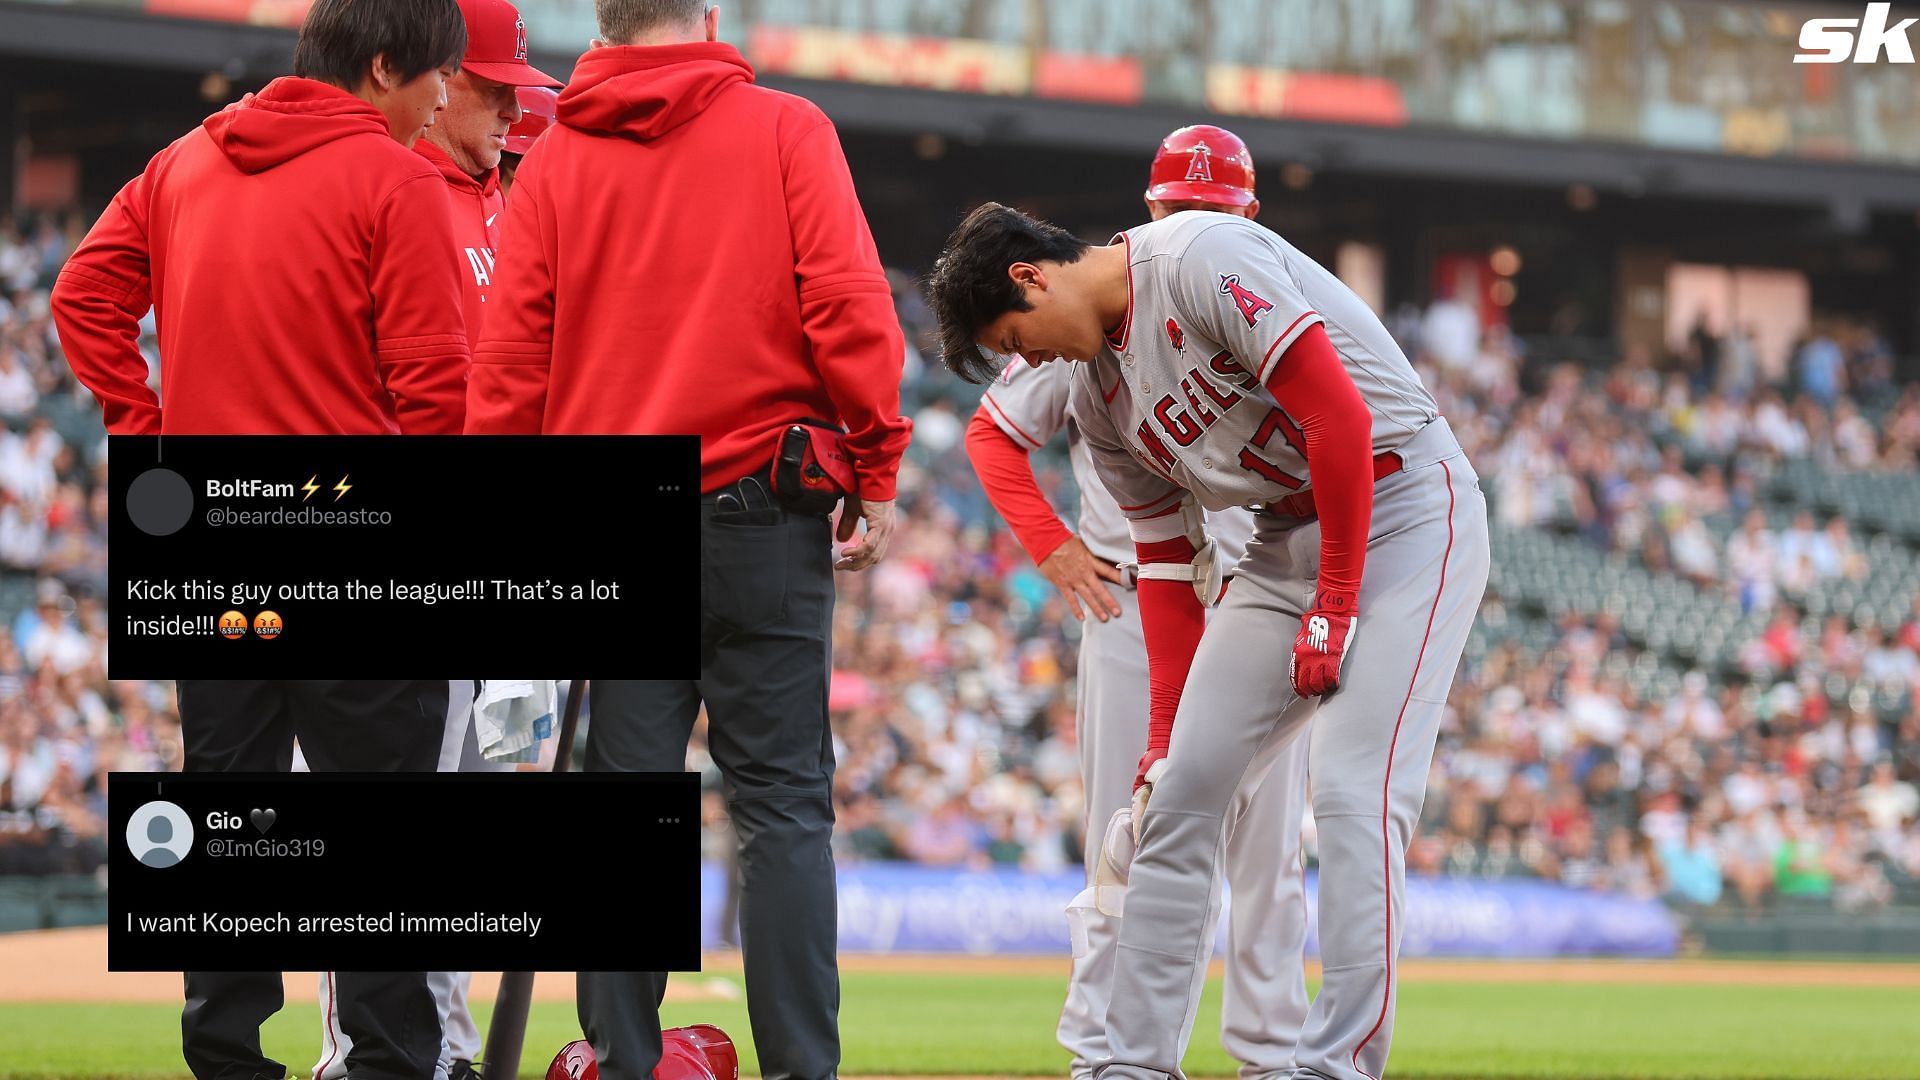 Shohei Ohtani of the Los Angeles Angels is looked over by trainers after being hit by a pitch from Michael Kopech of the Chicago White Sox